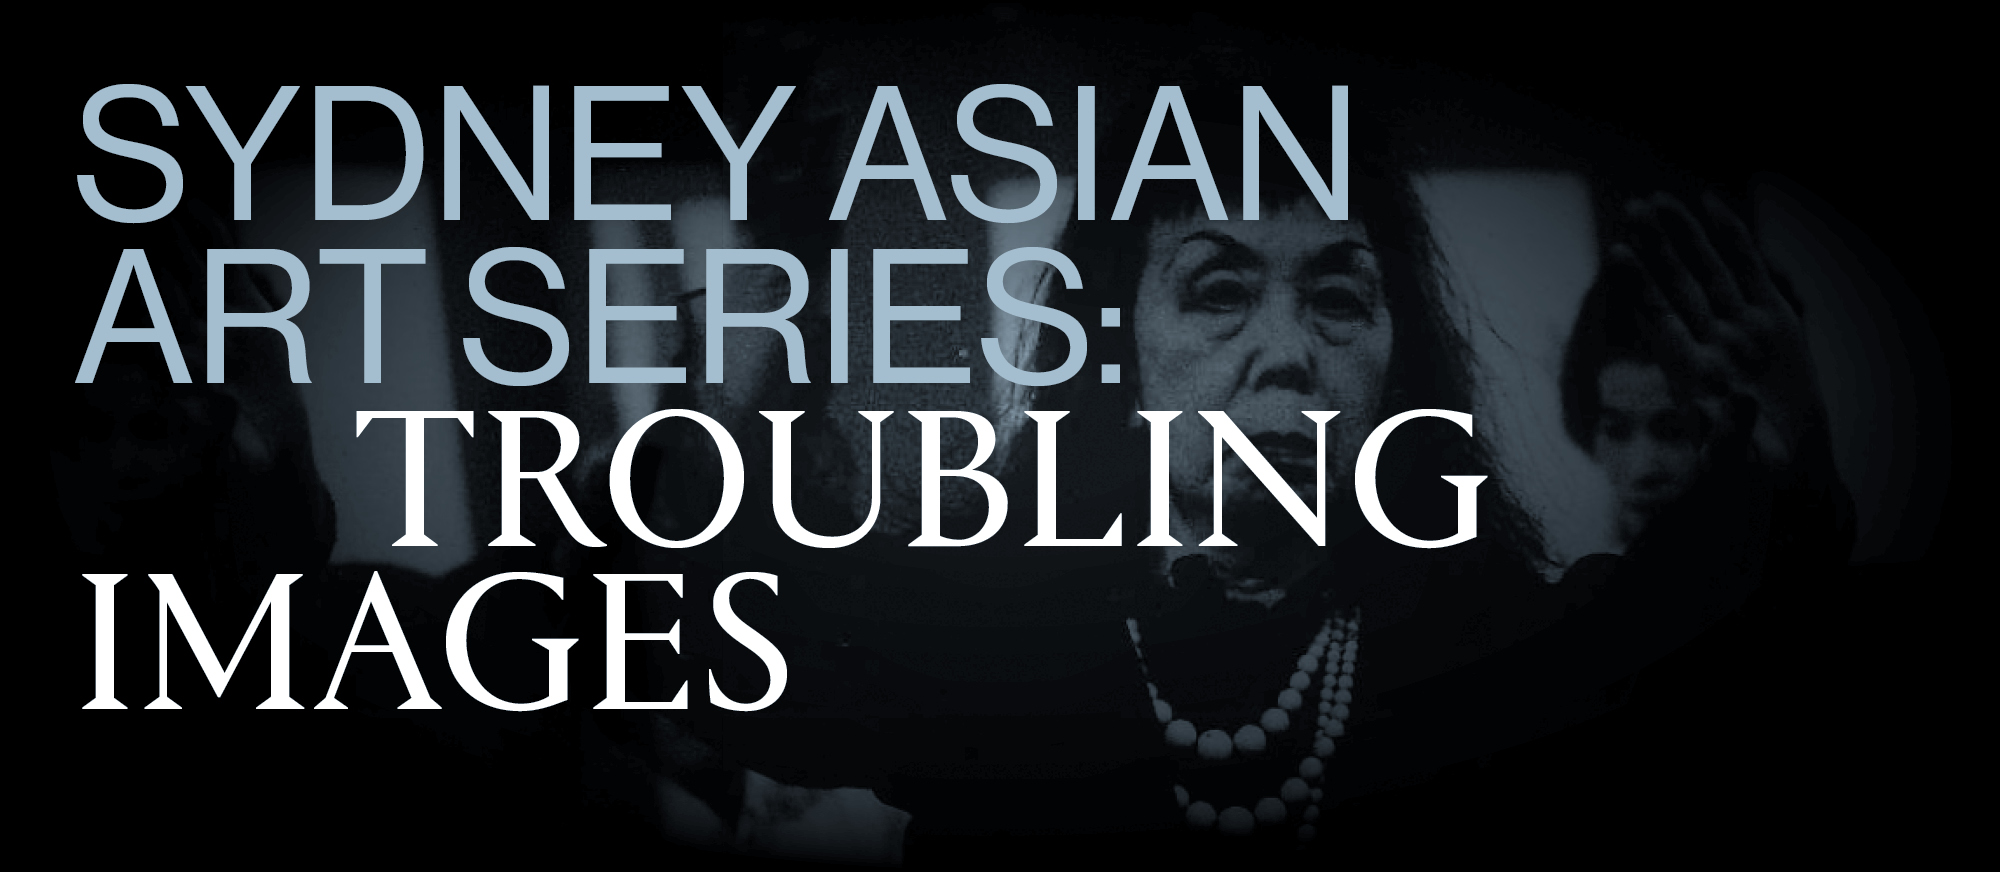 Sydney Asian Art Series: Troubling Images